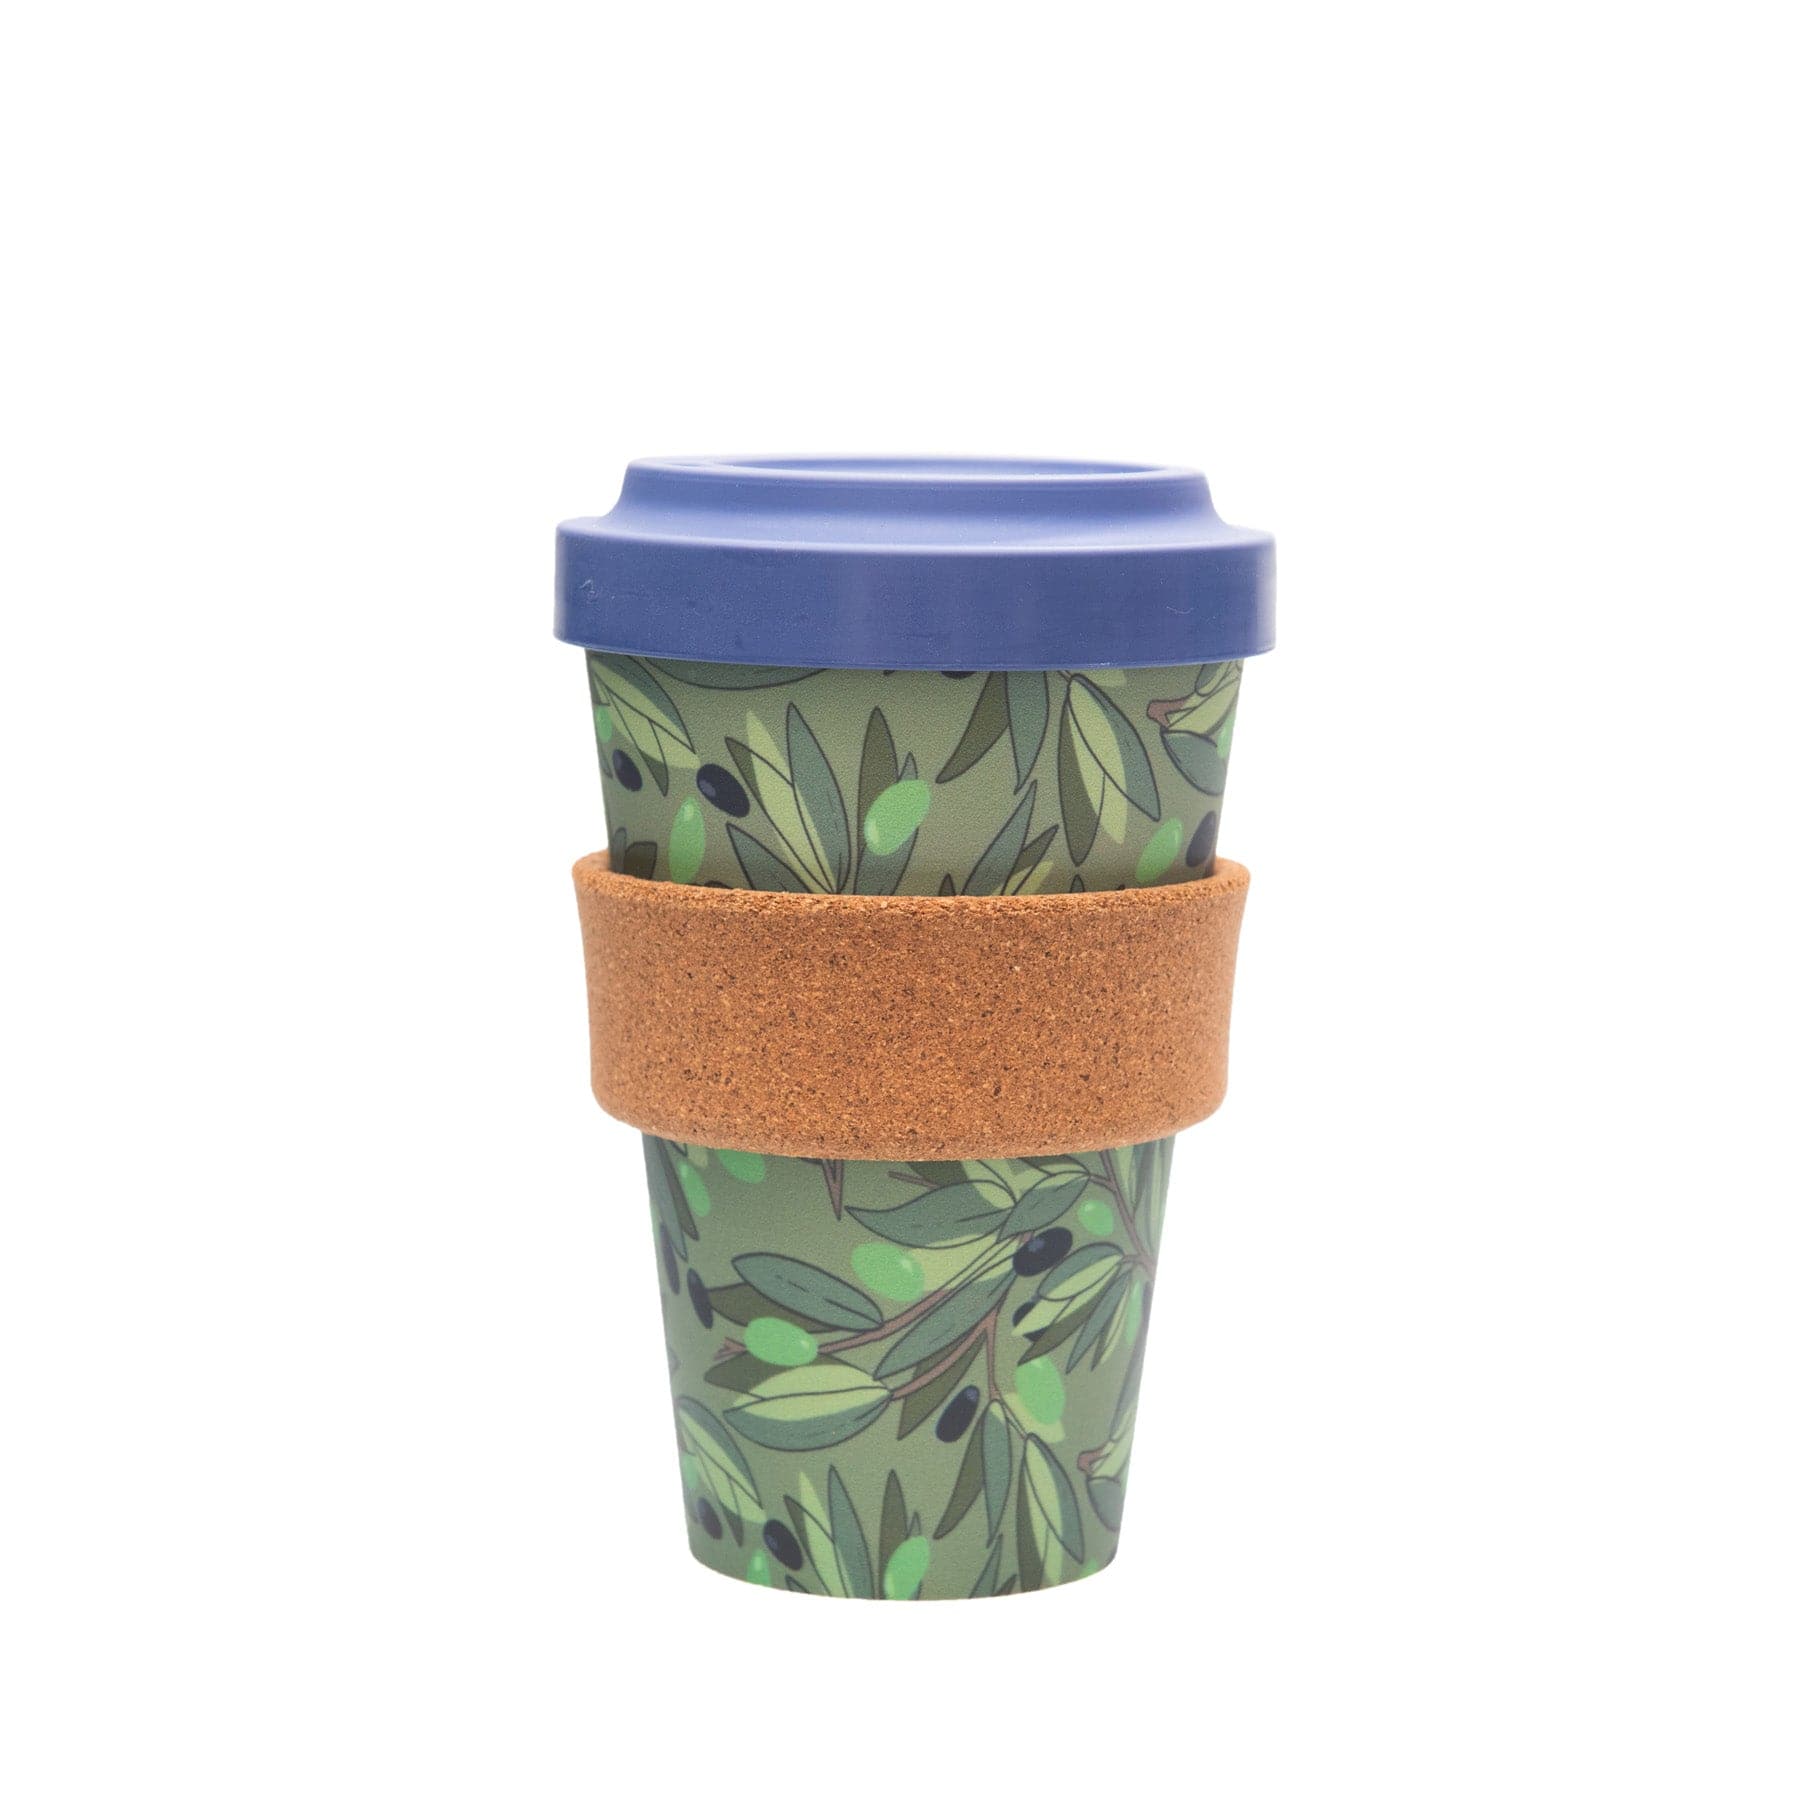 Reusable coffee cup with blue lid, olive leaf pattern, and cork sleeve on a white background